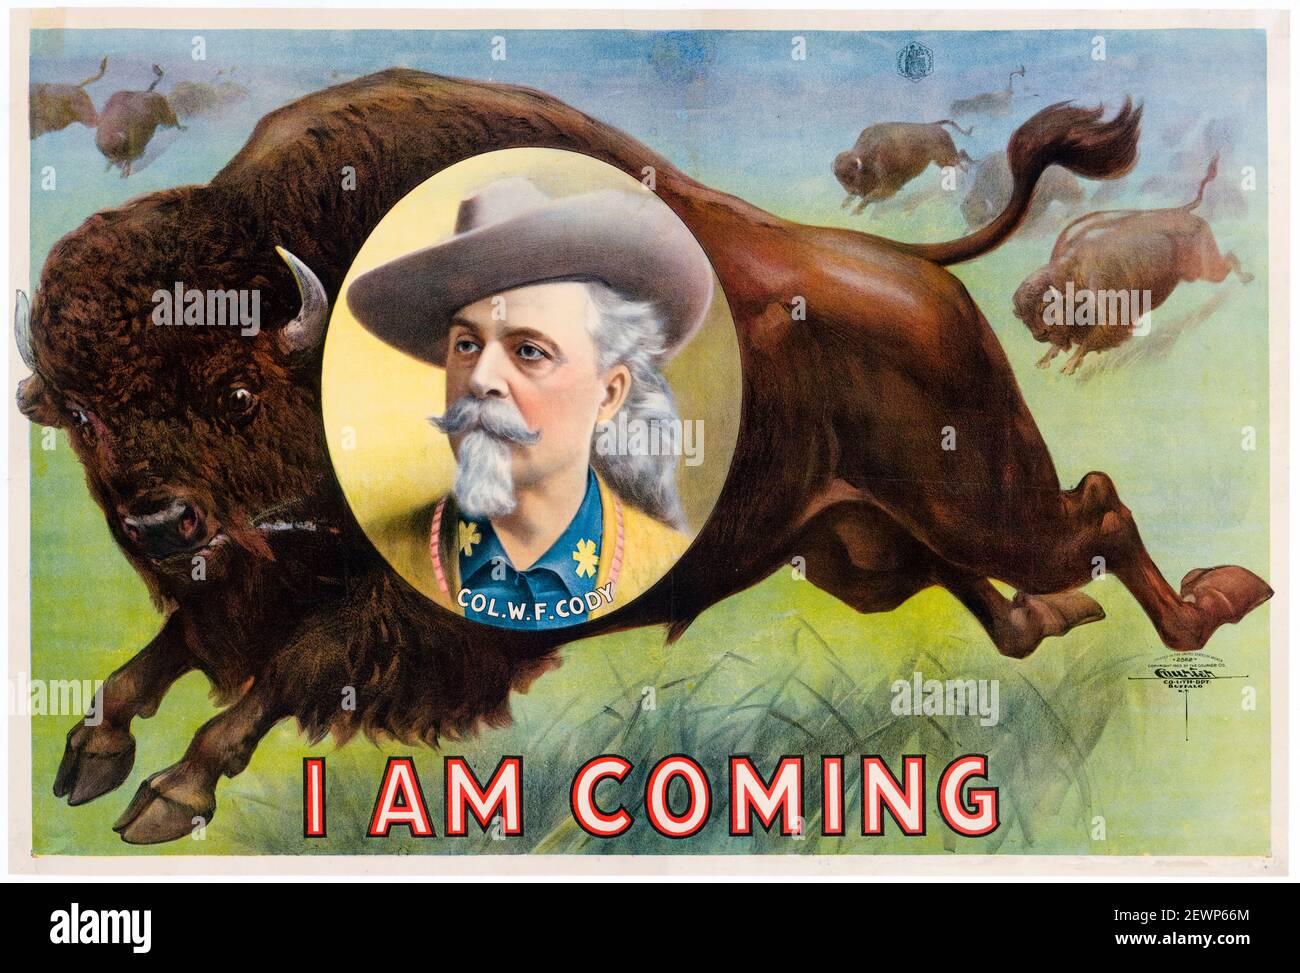 « I'm Coming », Buffalo Bill (William Frederick Cody, 1846-1917), affiche promotionnelle du Wild West Show 1900 Banque D'Images